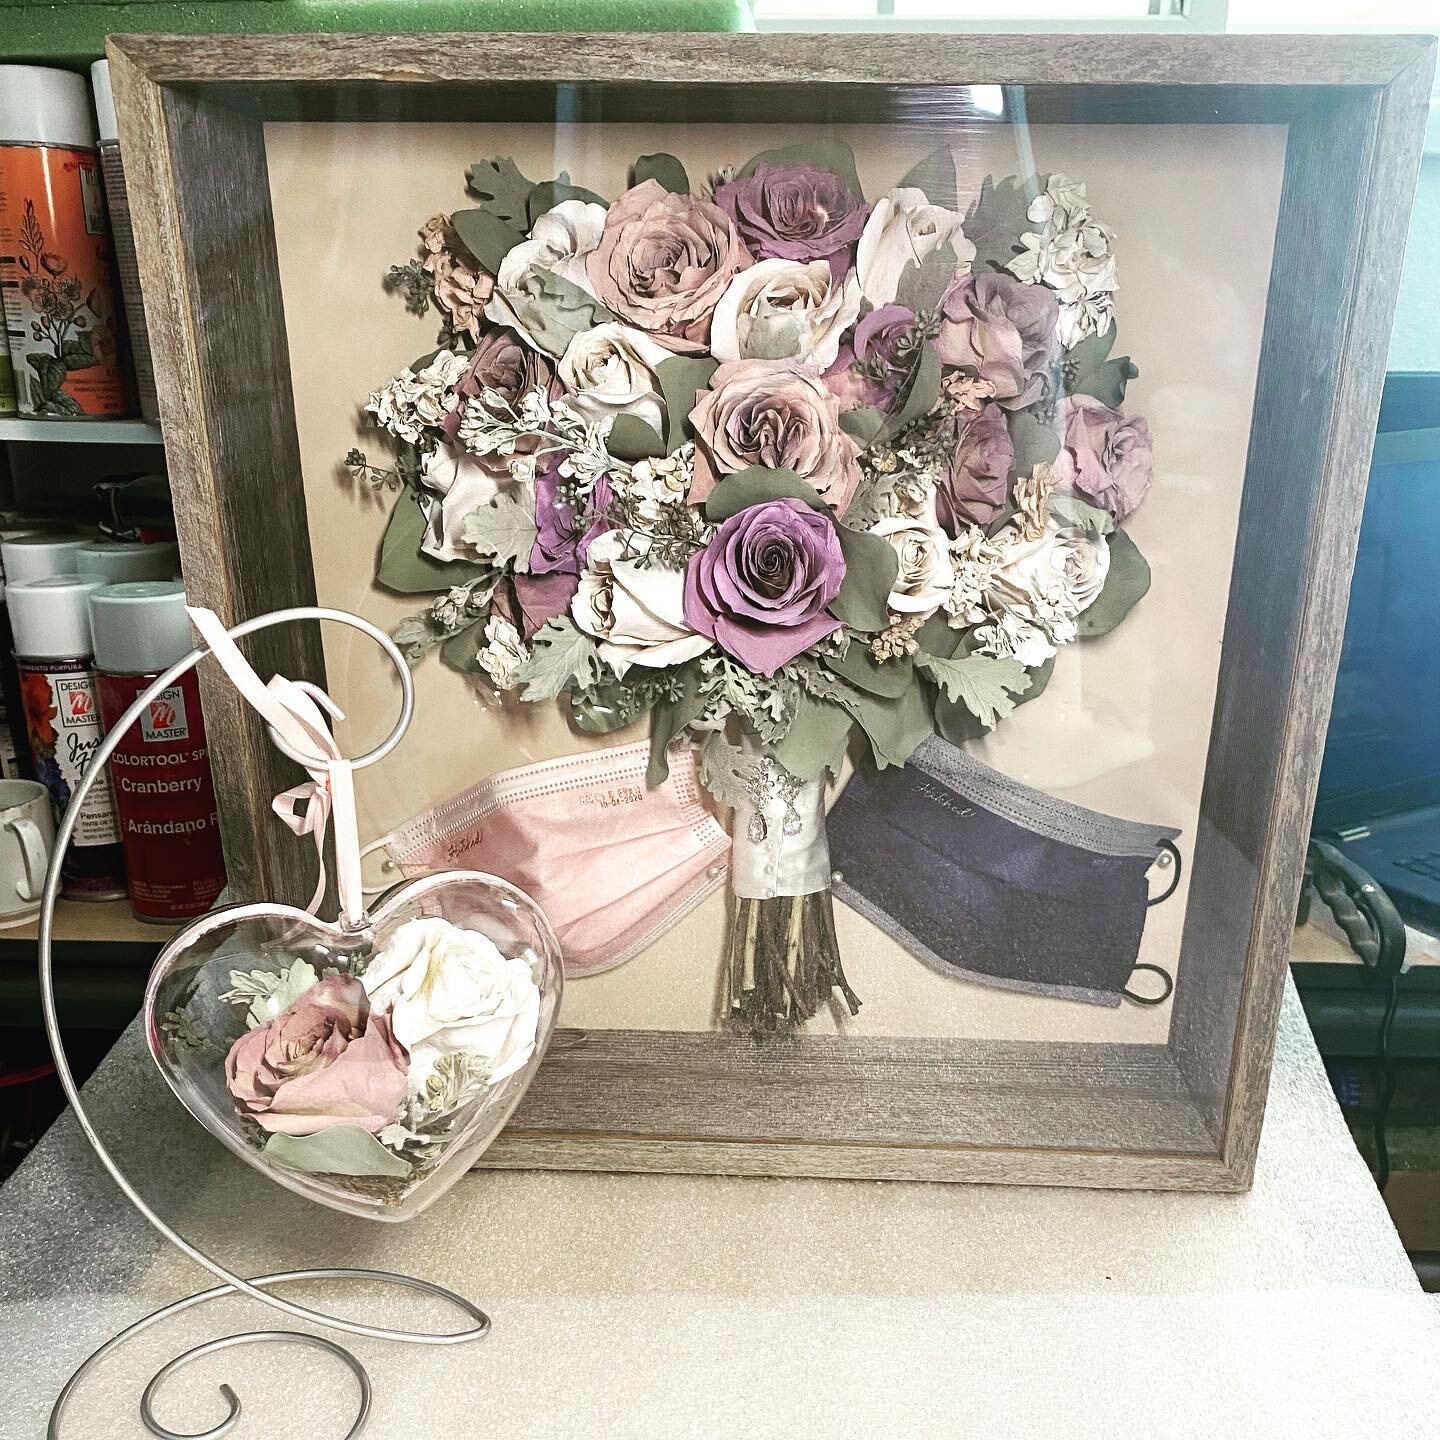 This rustic custom made box from Etsy turned out nice.  Even though it&rsquo;s made with used scrap wood and cheap plastic &hellip; it&rsquo;s exactly what my customer wanted.  She loved it and the ornament I made with the extra roses from her bouque